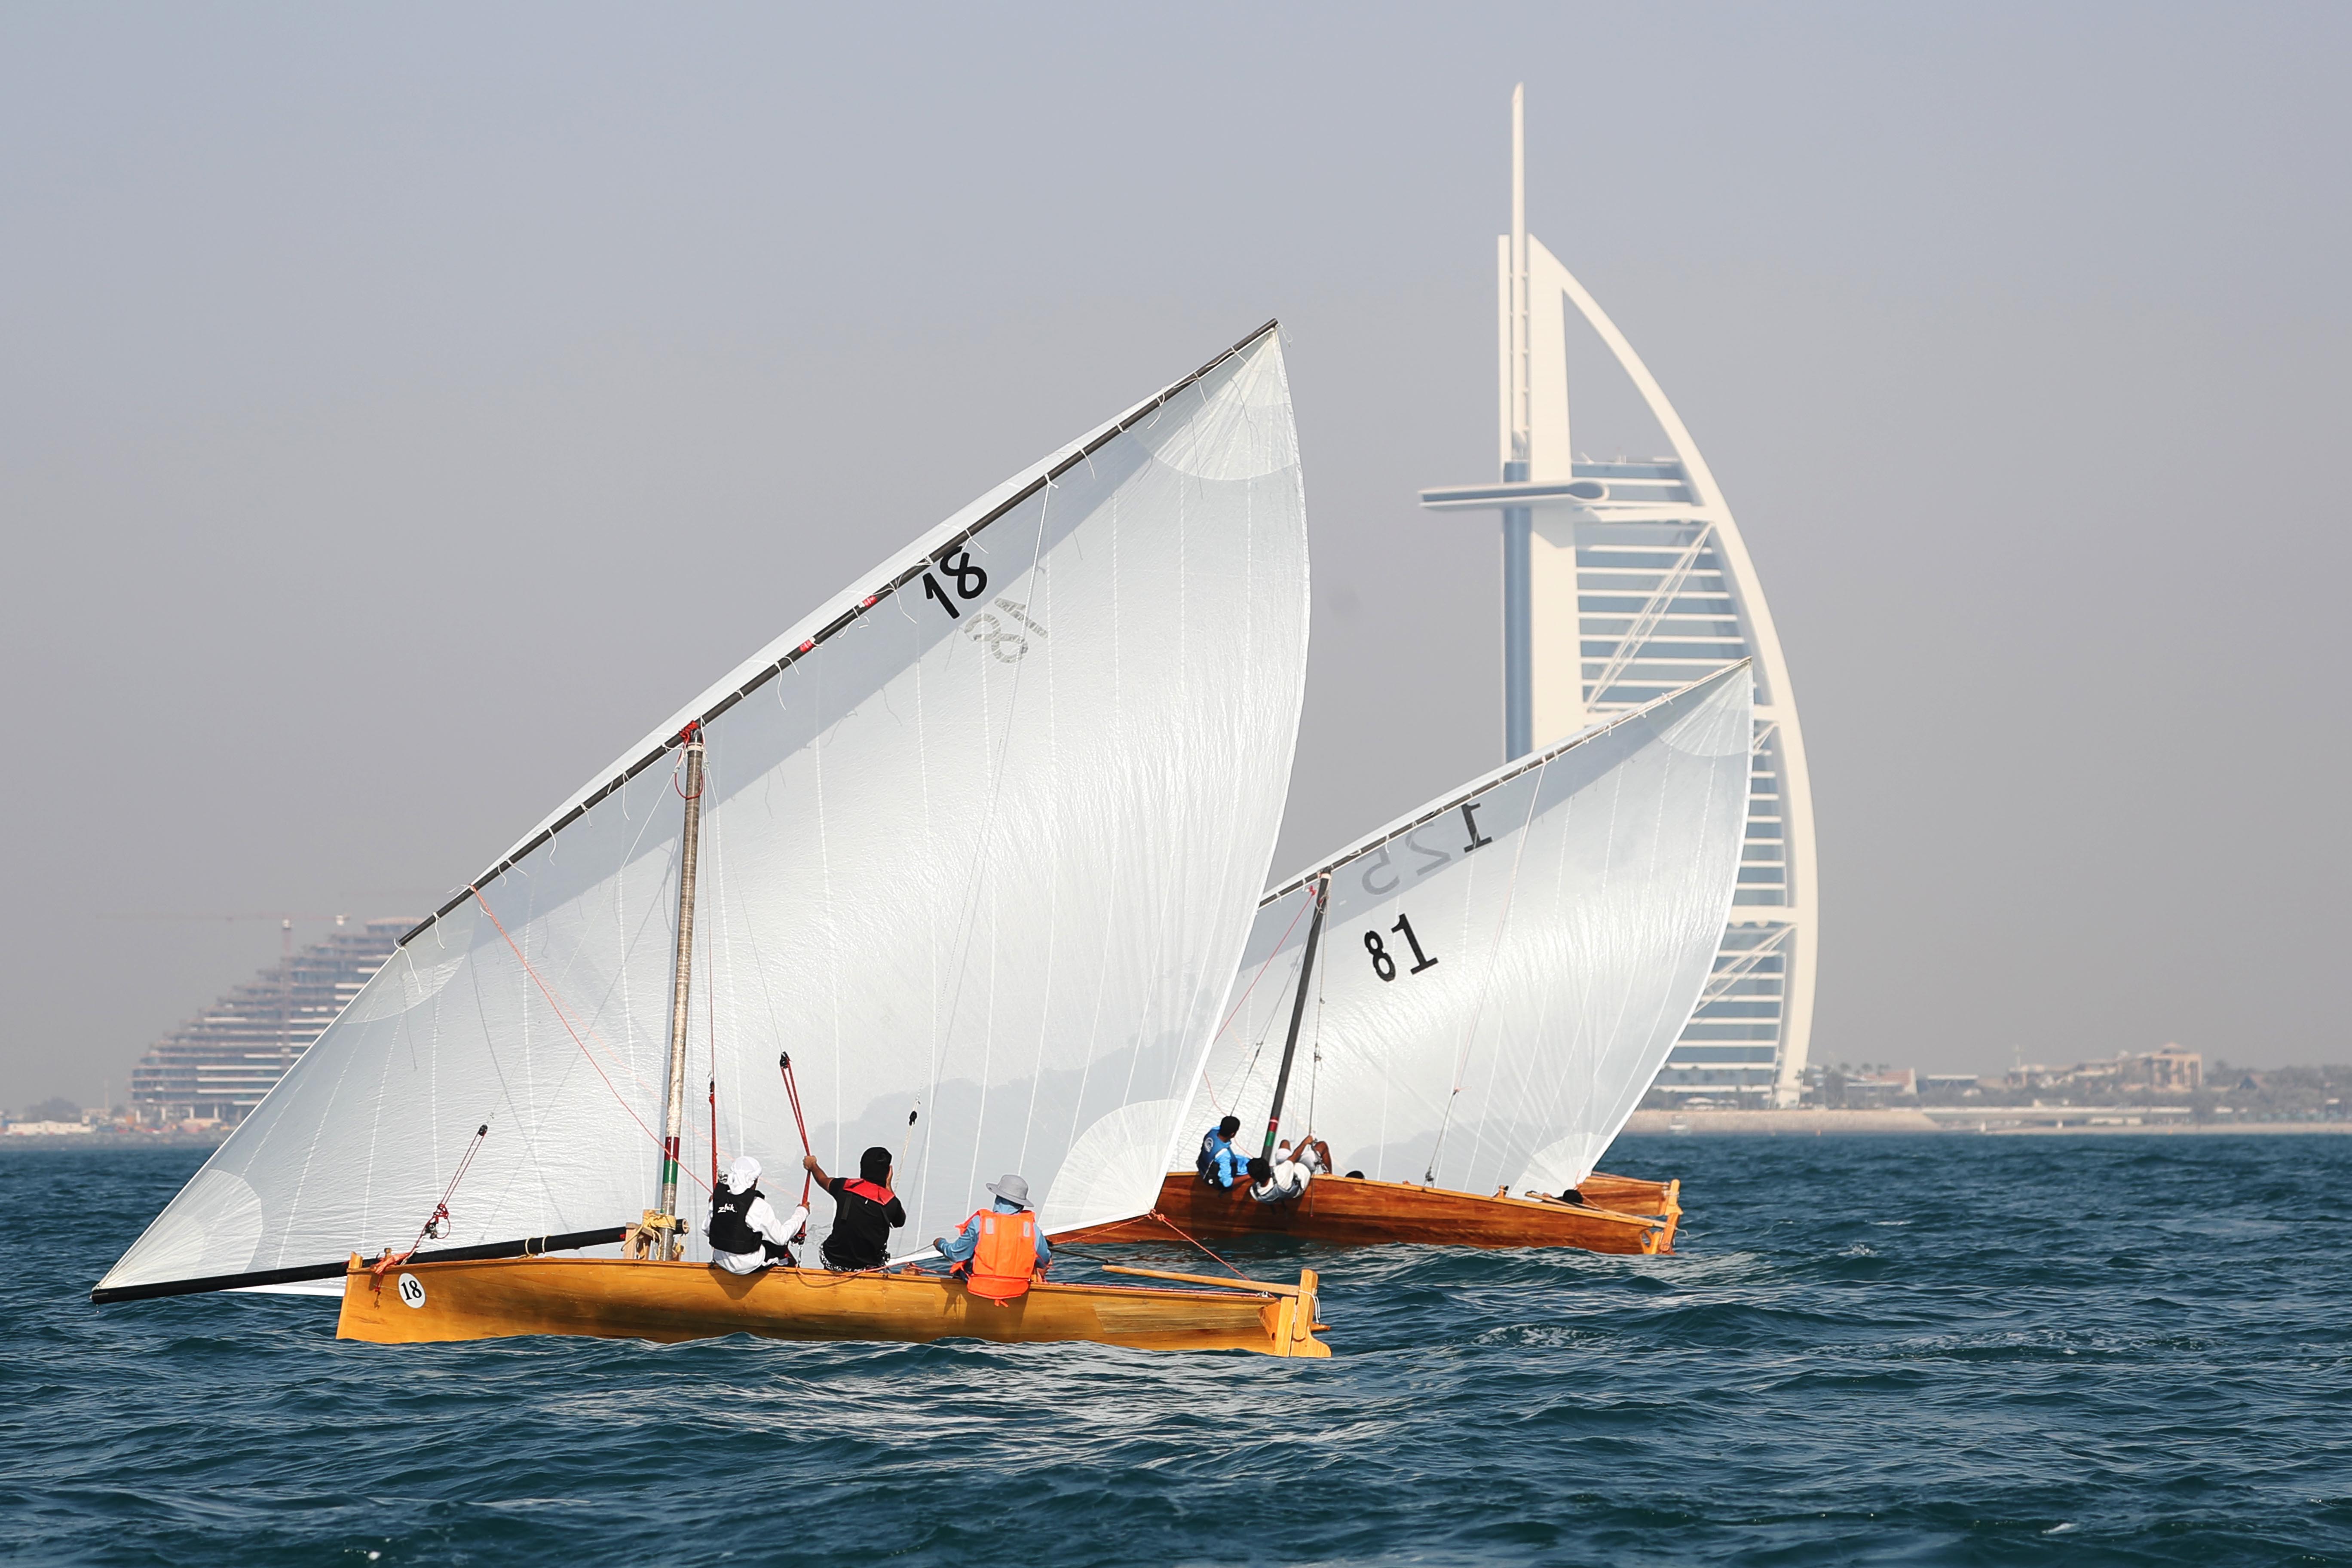 40 Boats to Compete for the 22ft Dhow Race in Jumeirah Shore Today